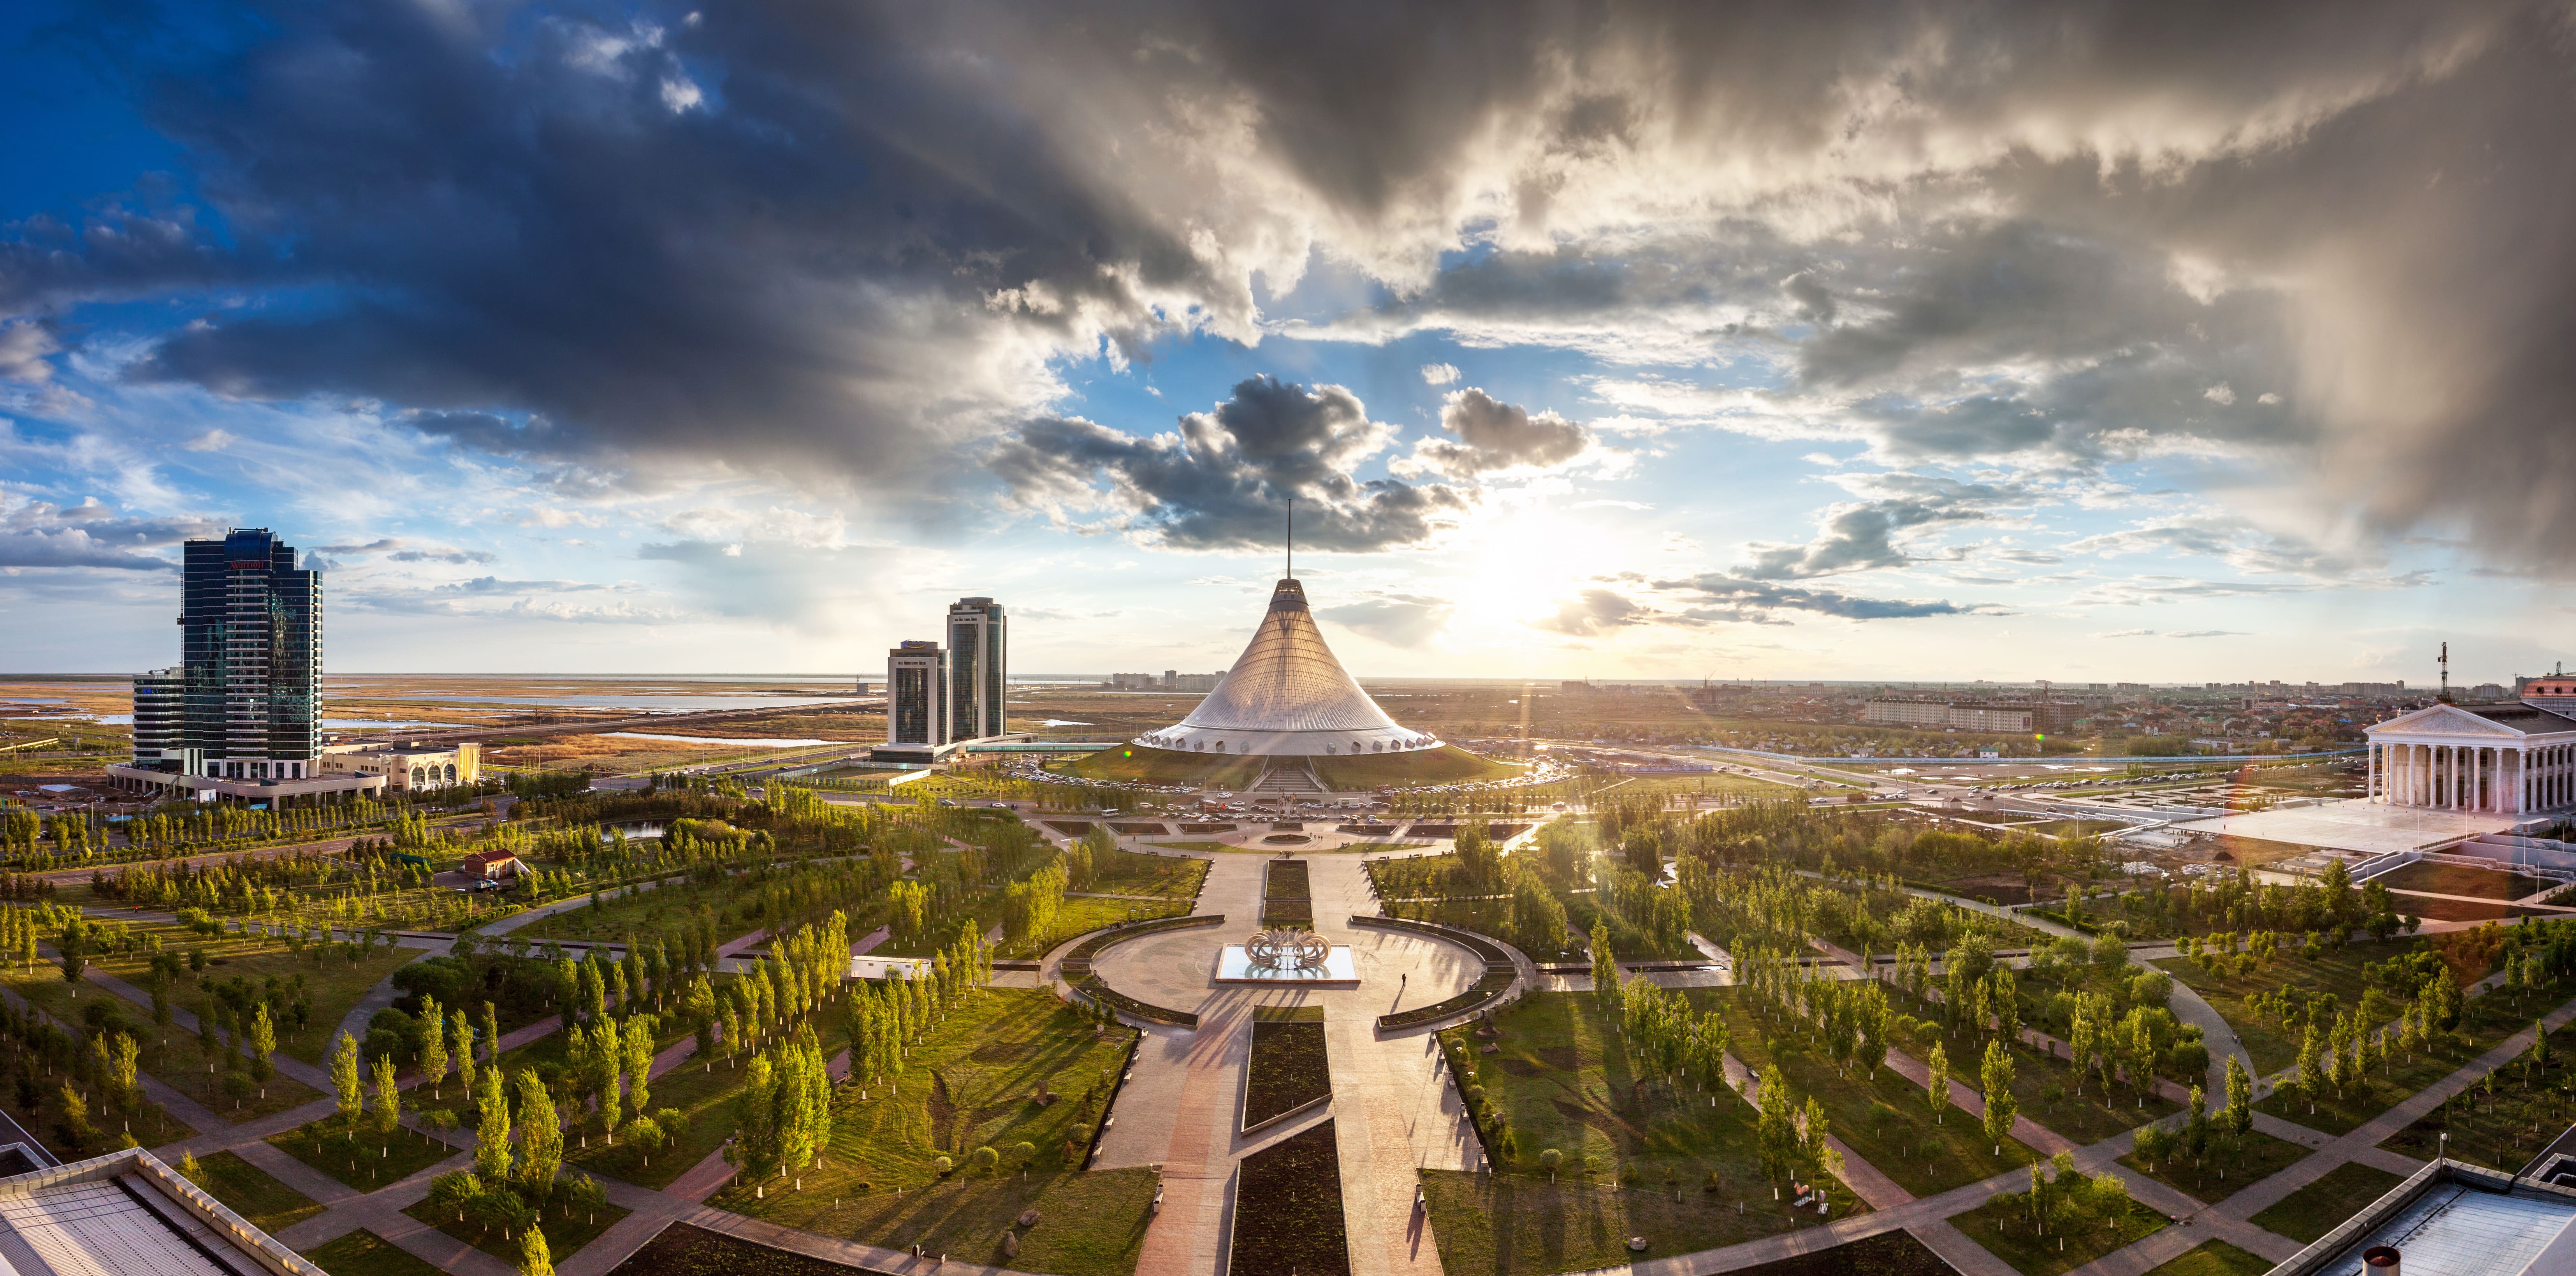 Expats Give Kazakhstan High Marks In New InterNations Report The